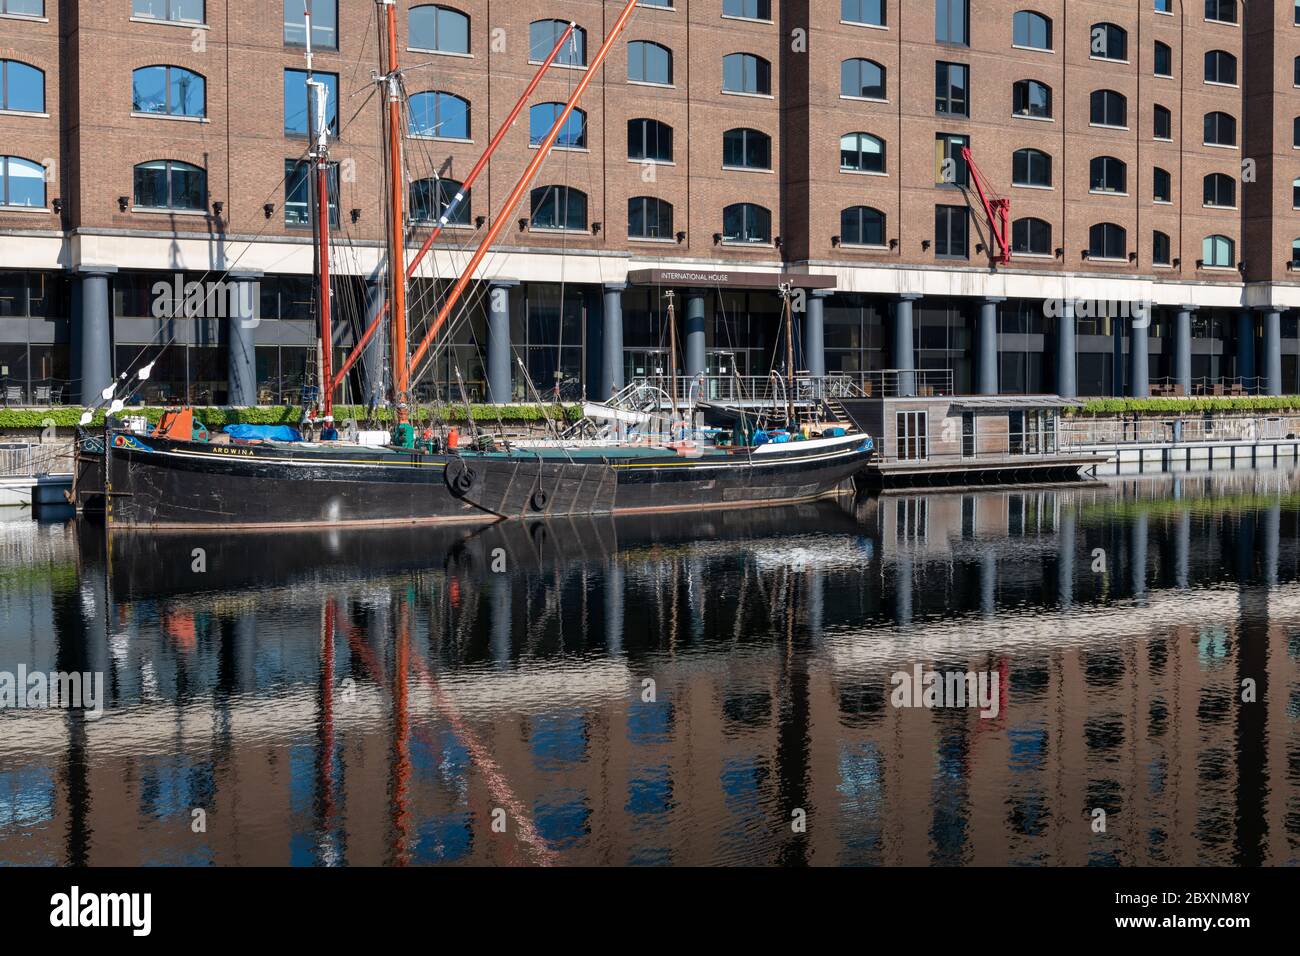 Historic Thames sailing barges moored in St. Katherine Docks Marina. London. An exclusive leisure, housing and business development. Stock Photo